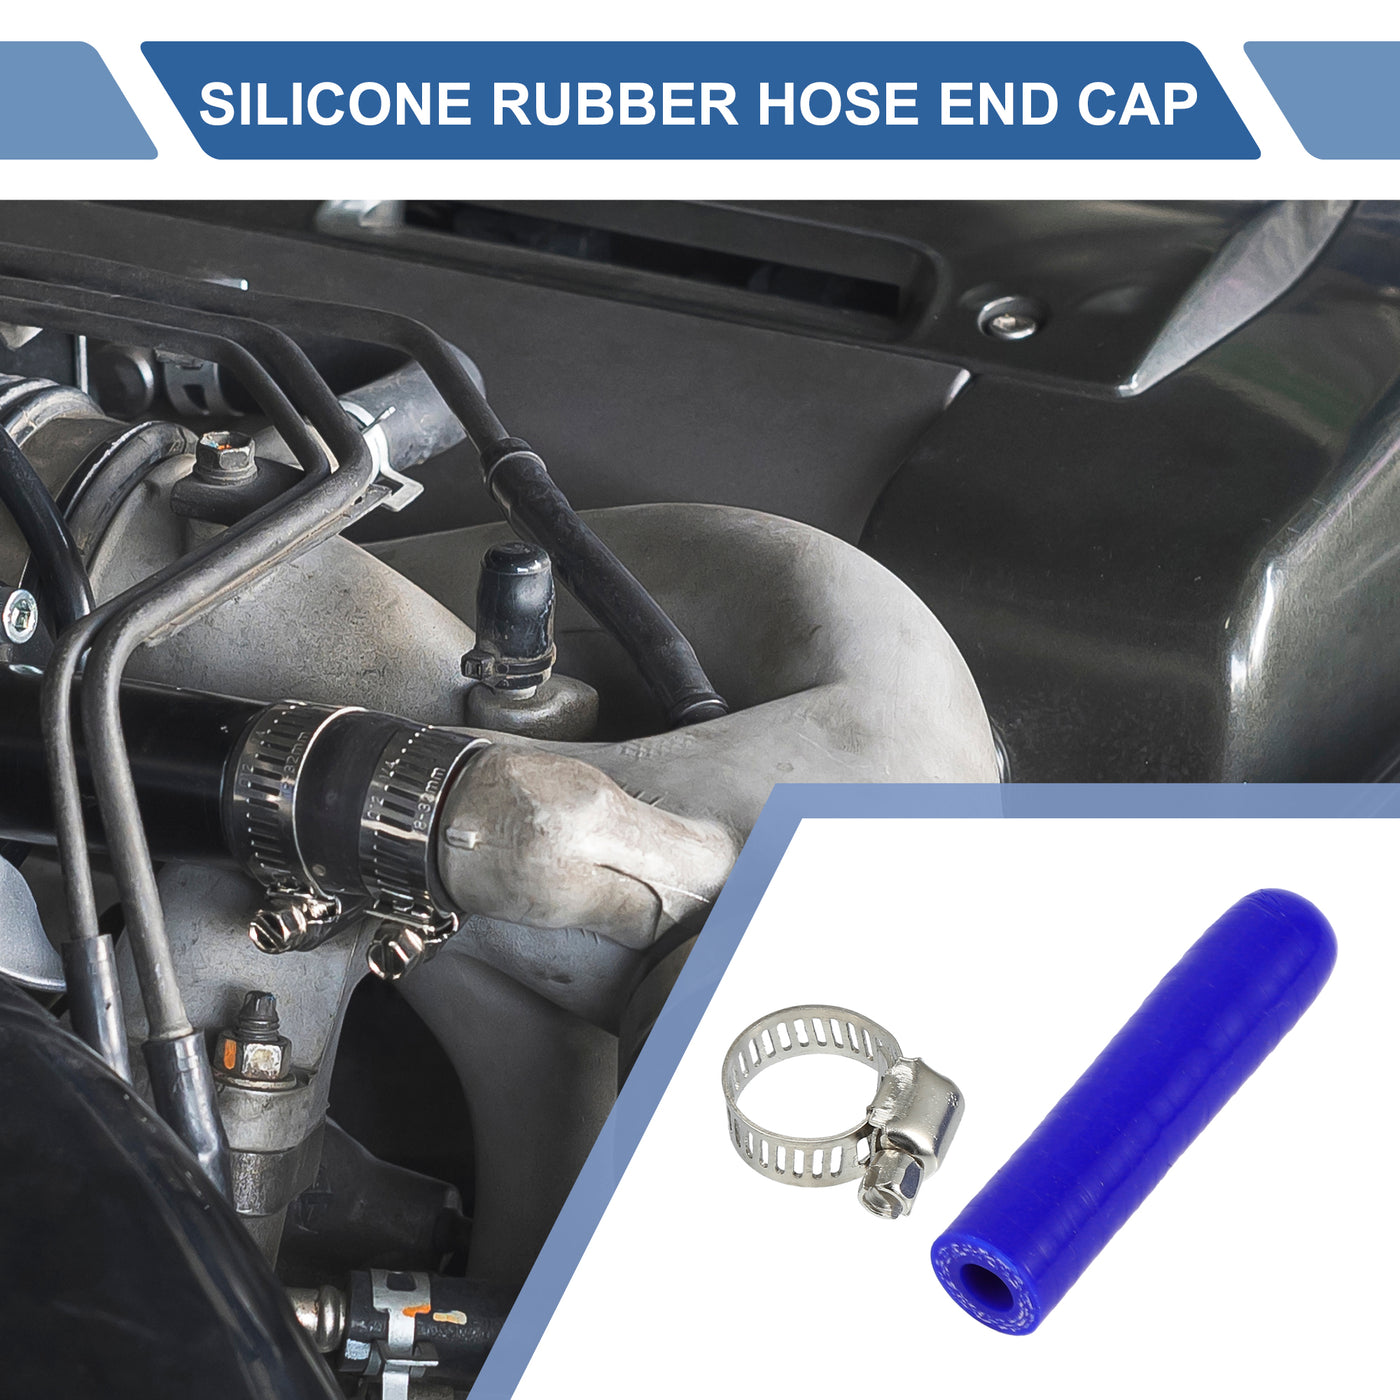 X AUTOHAUX 1 Pcs 60mm Length 8mm/0.31" ID Blue Car Silicone Rubber Hose End Cap with Clamp Silicone Reinforced Blanking Cap for Bypass Tube Universal